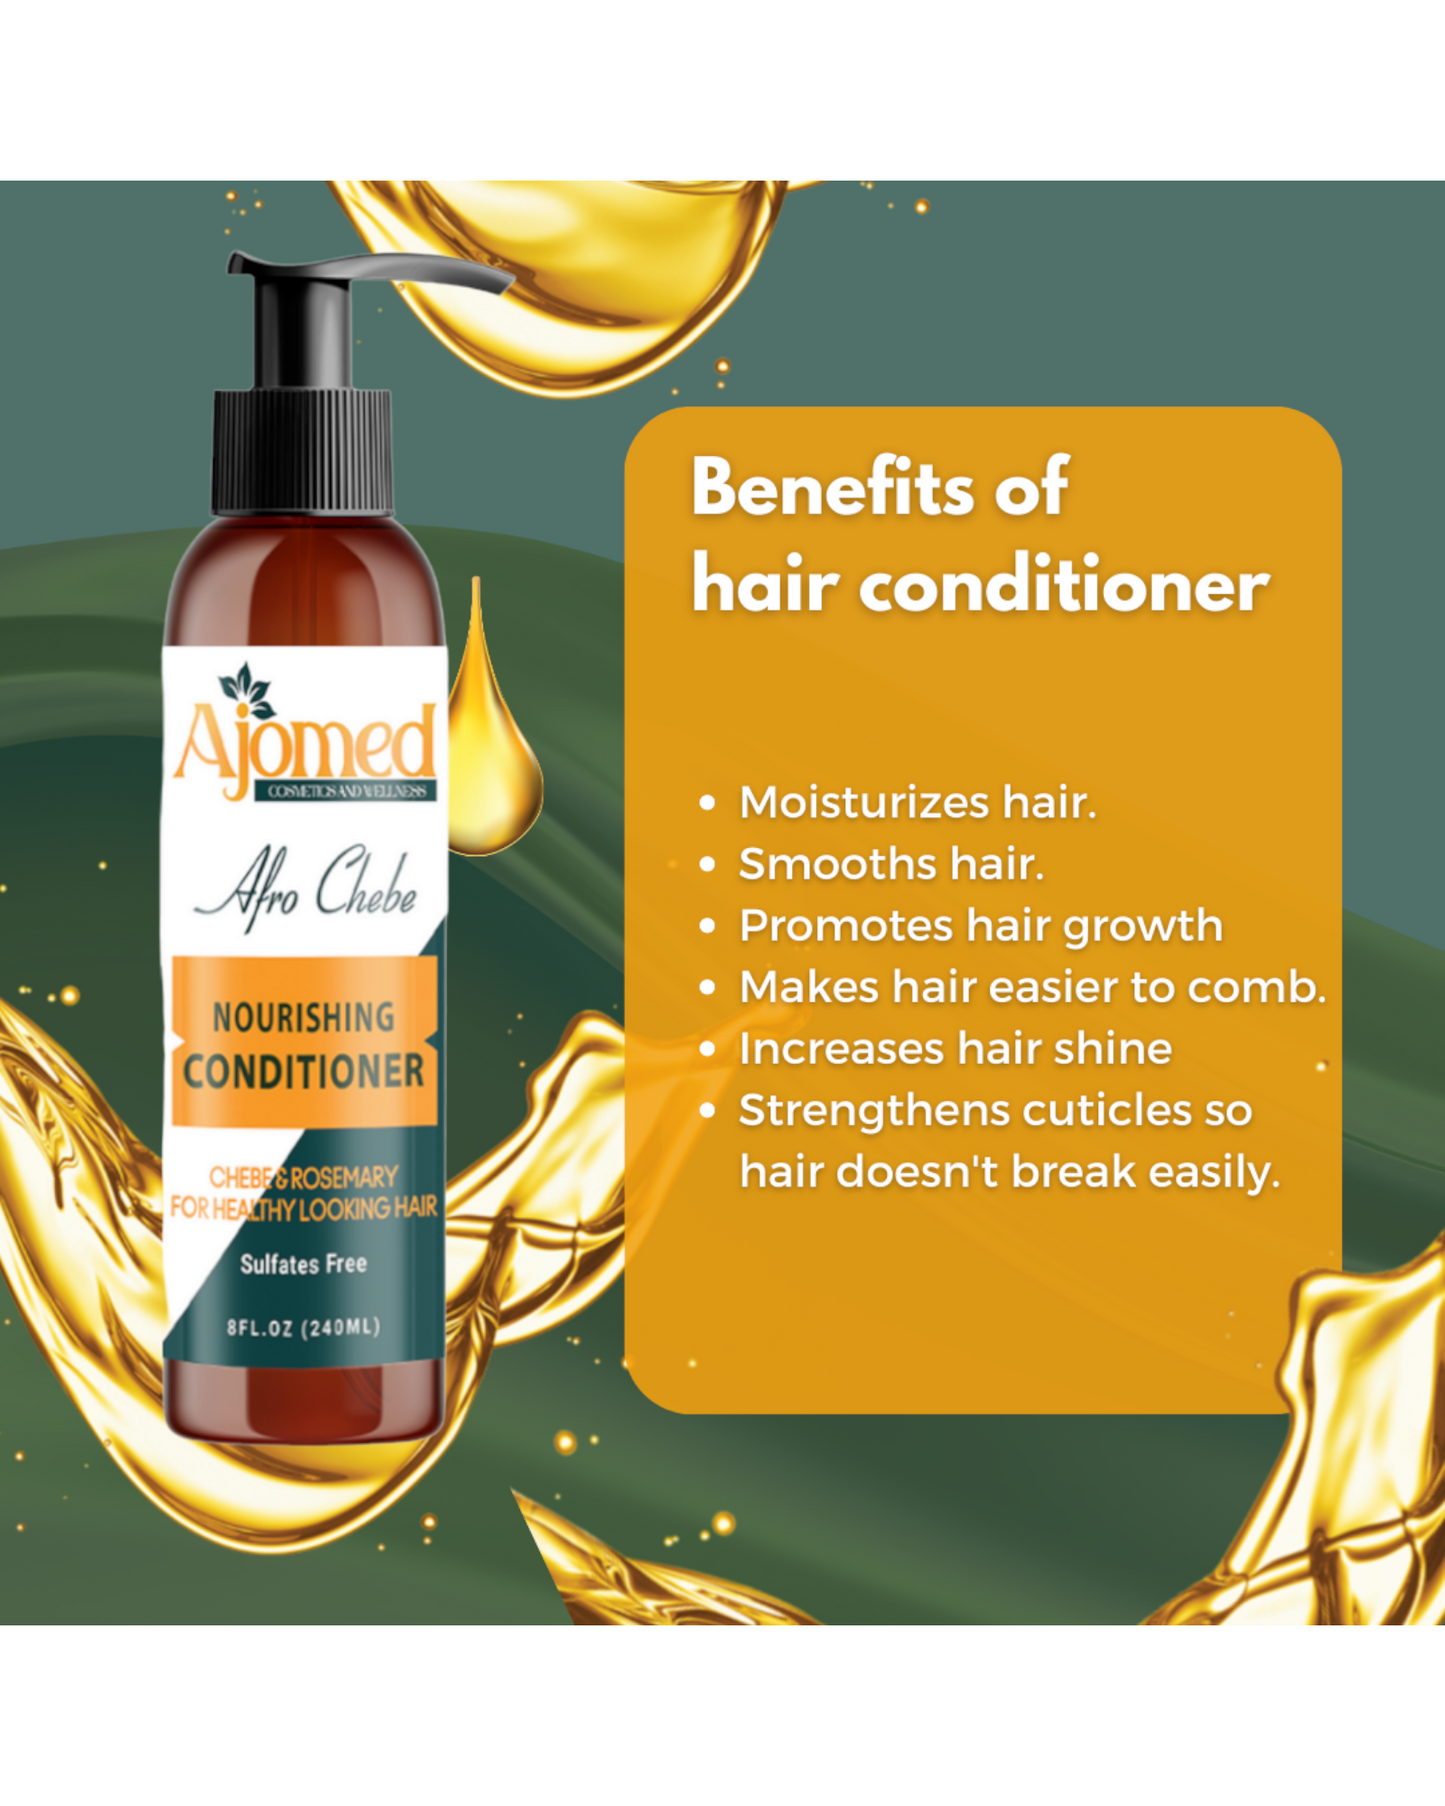 Chebe Hair Growth Conditioner - Hair Conditioner for Hair Short or Long, Hair Conditioner for Men, Essential Moisturizer for Every Man's Hair